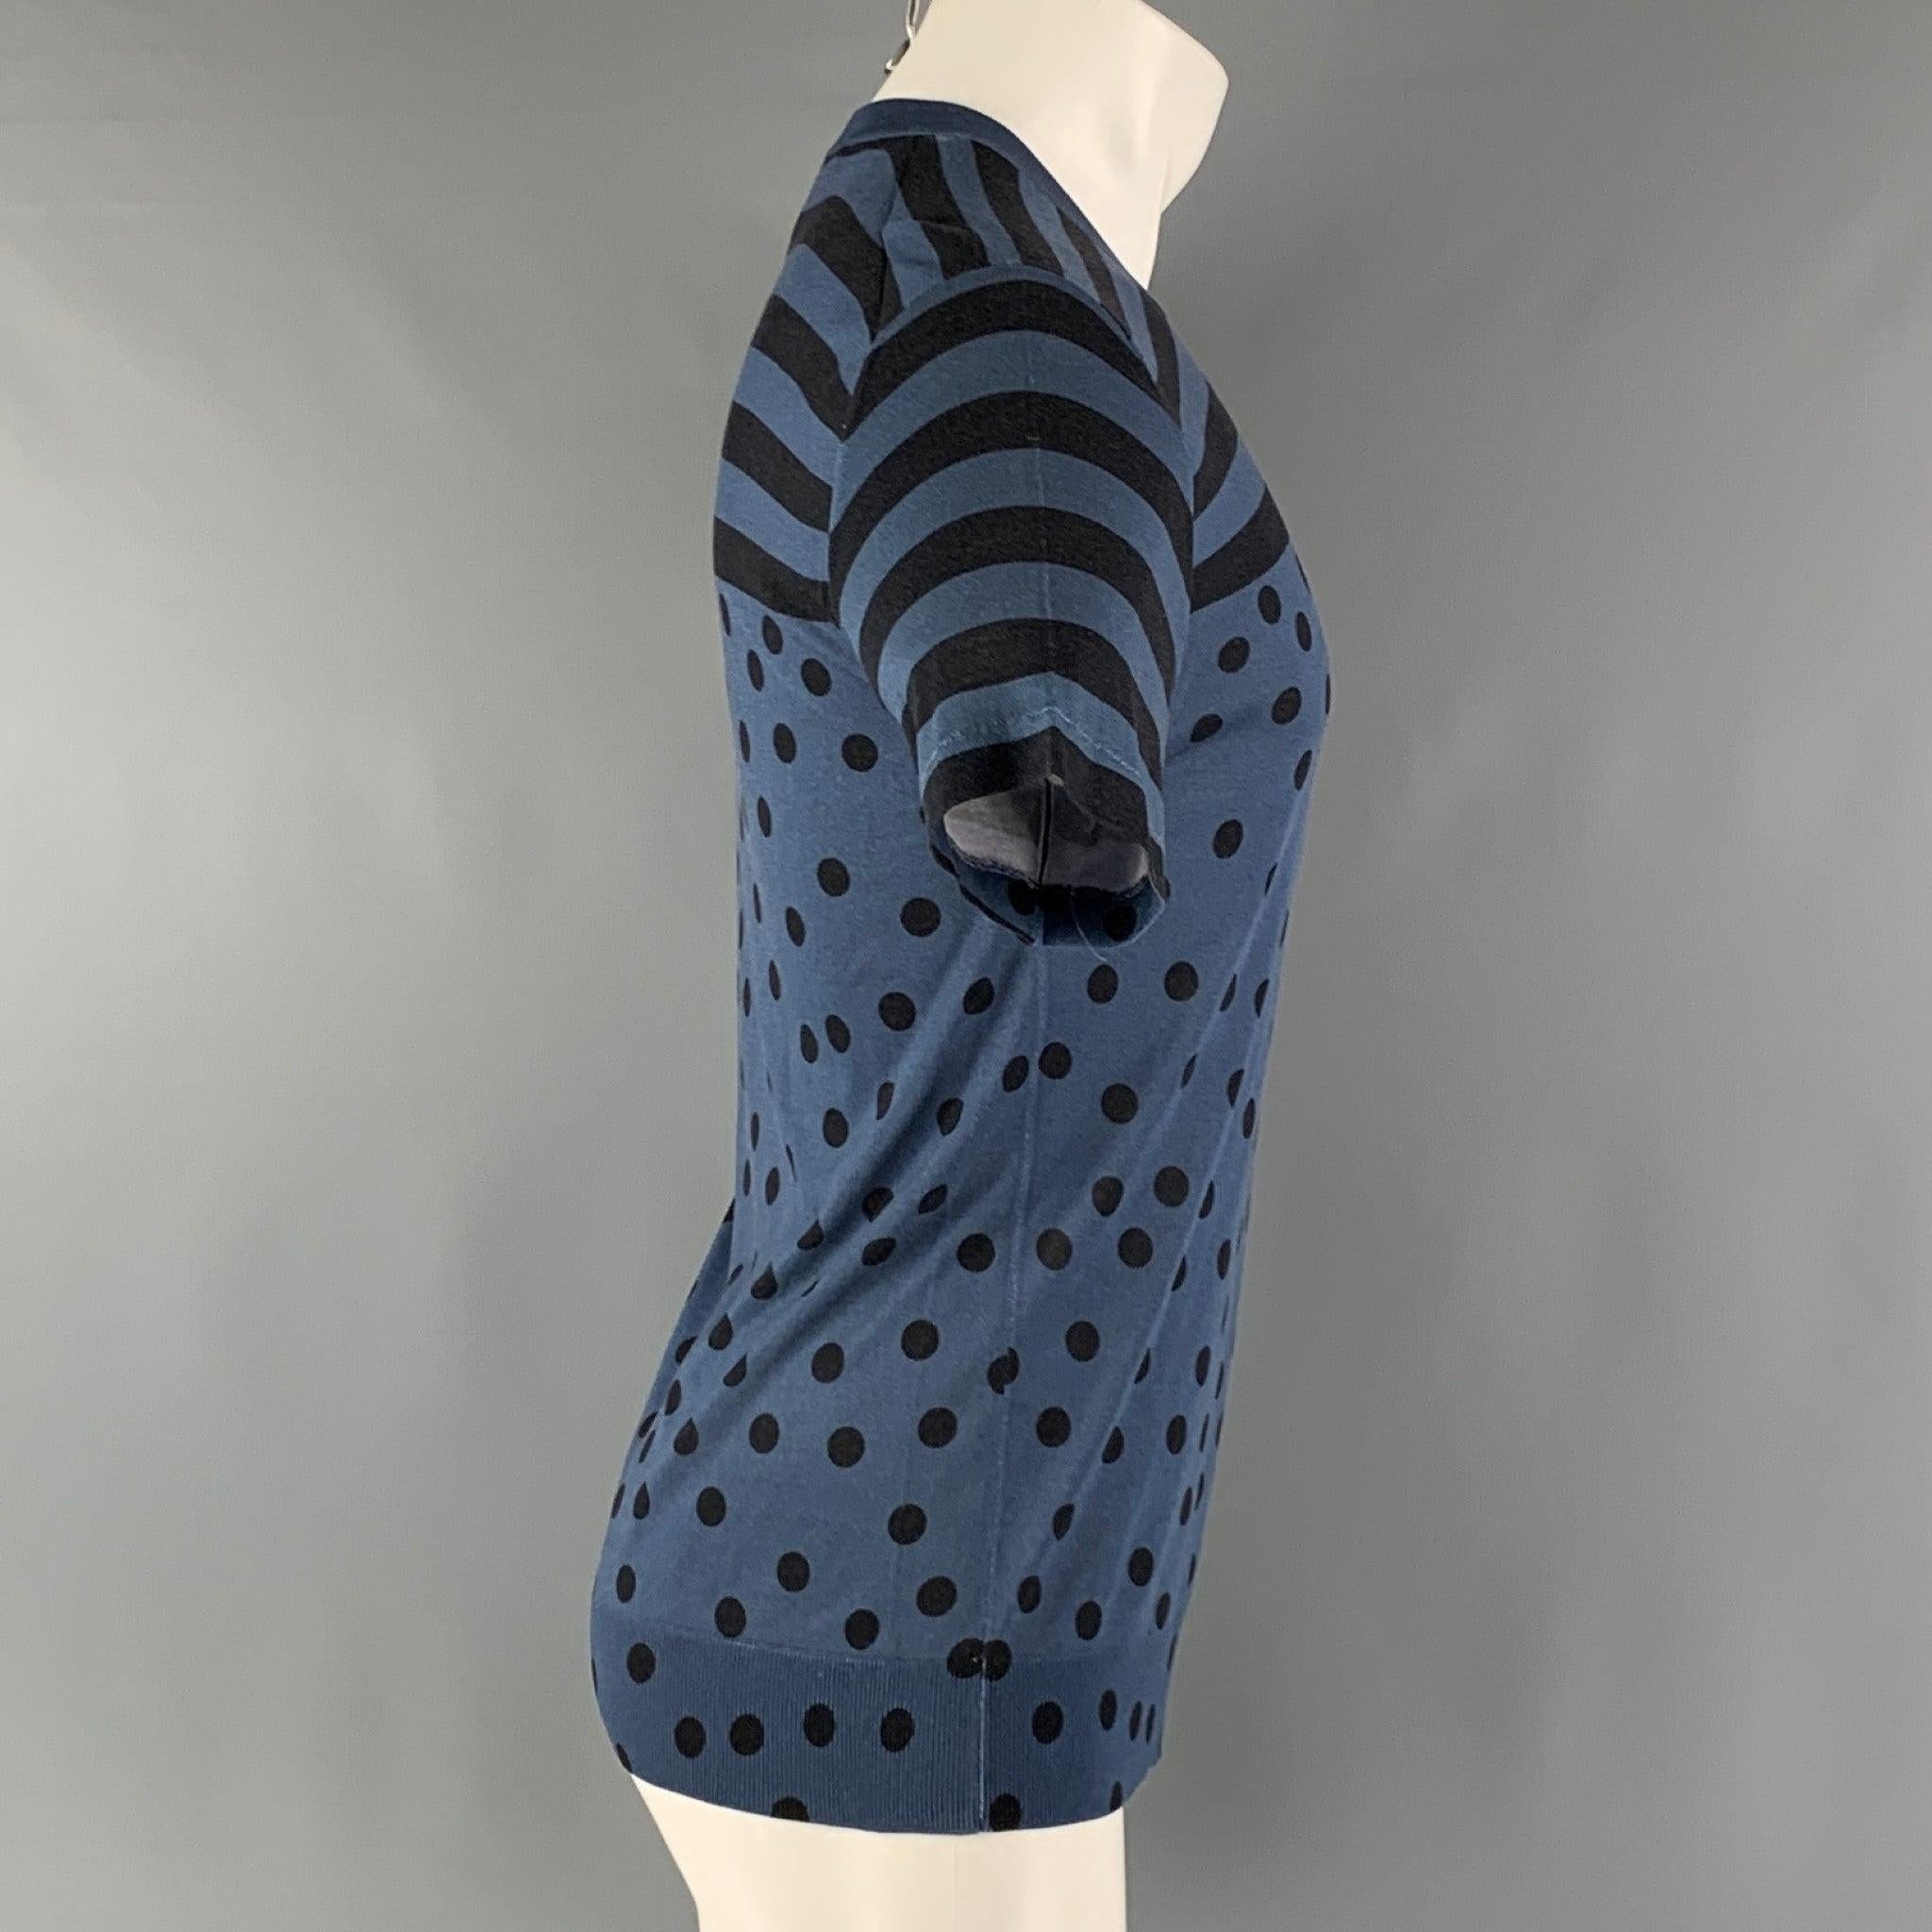 DOLCE & GABBANA T-shirt comes in a blue and black silk jersey knit material featuring a polka dot and strips mix pattern, and a V-neck. Made in Italy.Good Pre-Owned Condition. Moderate color fading. As -Is.  

Marked:   46 

Measurements: 
